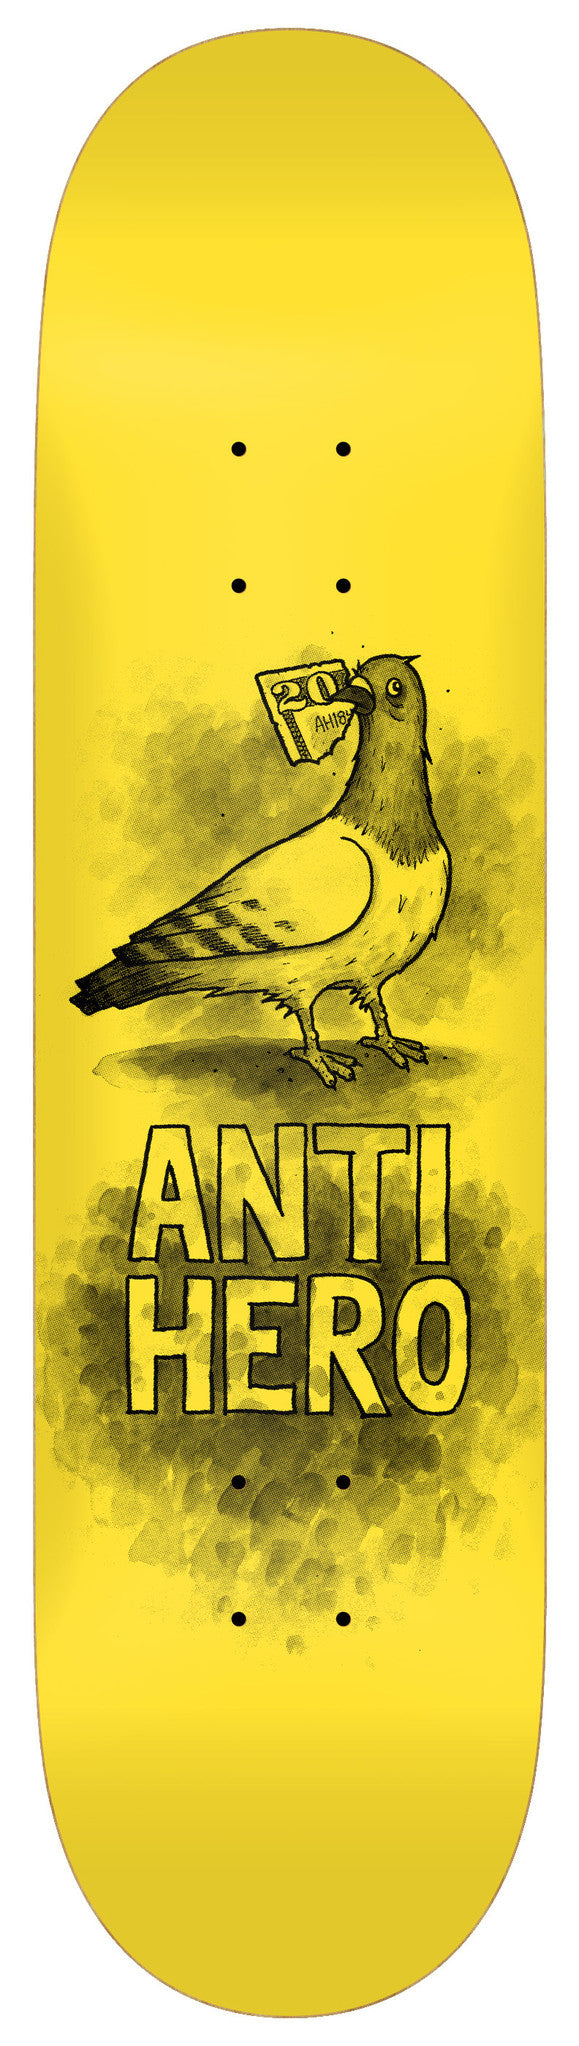 A yellow skateboard with the words ANTI HERO BUDGIE PRICE POINT 8.25 from ANTIHERO on it.